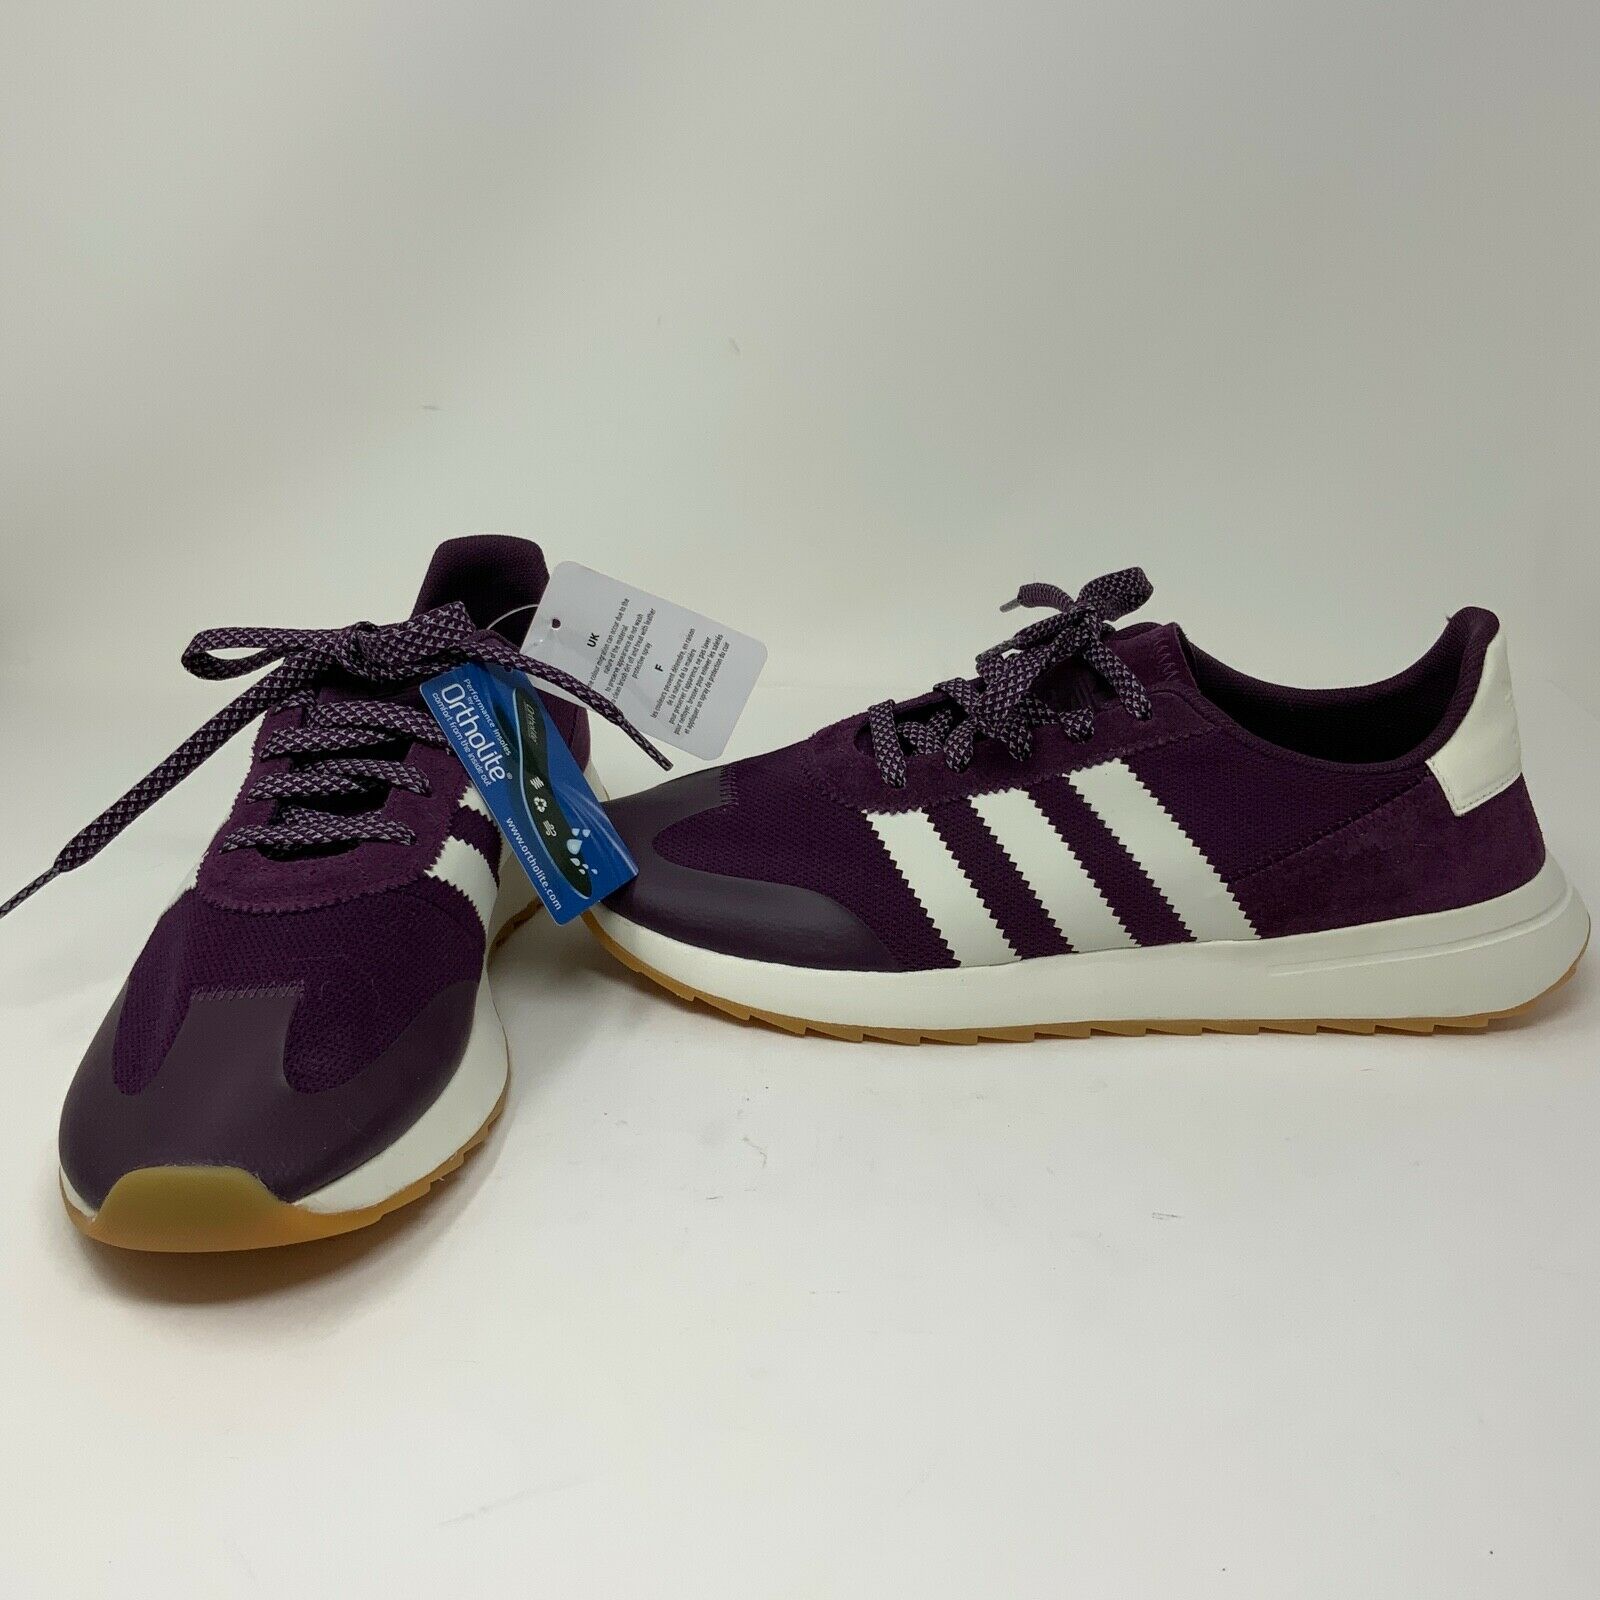 NEW Adidas Flashback Women's Suede Ortholite Insoles Purple Suede Sneakers Shoes